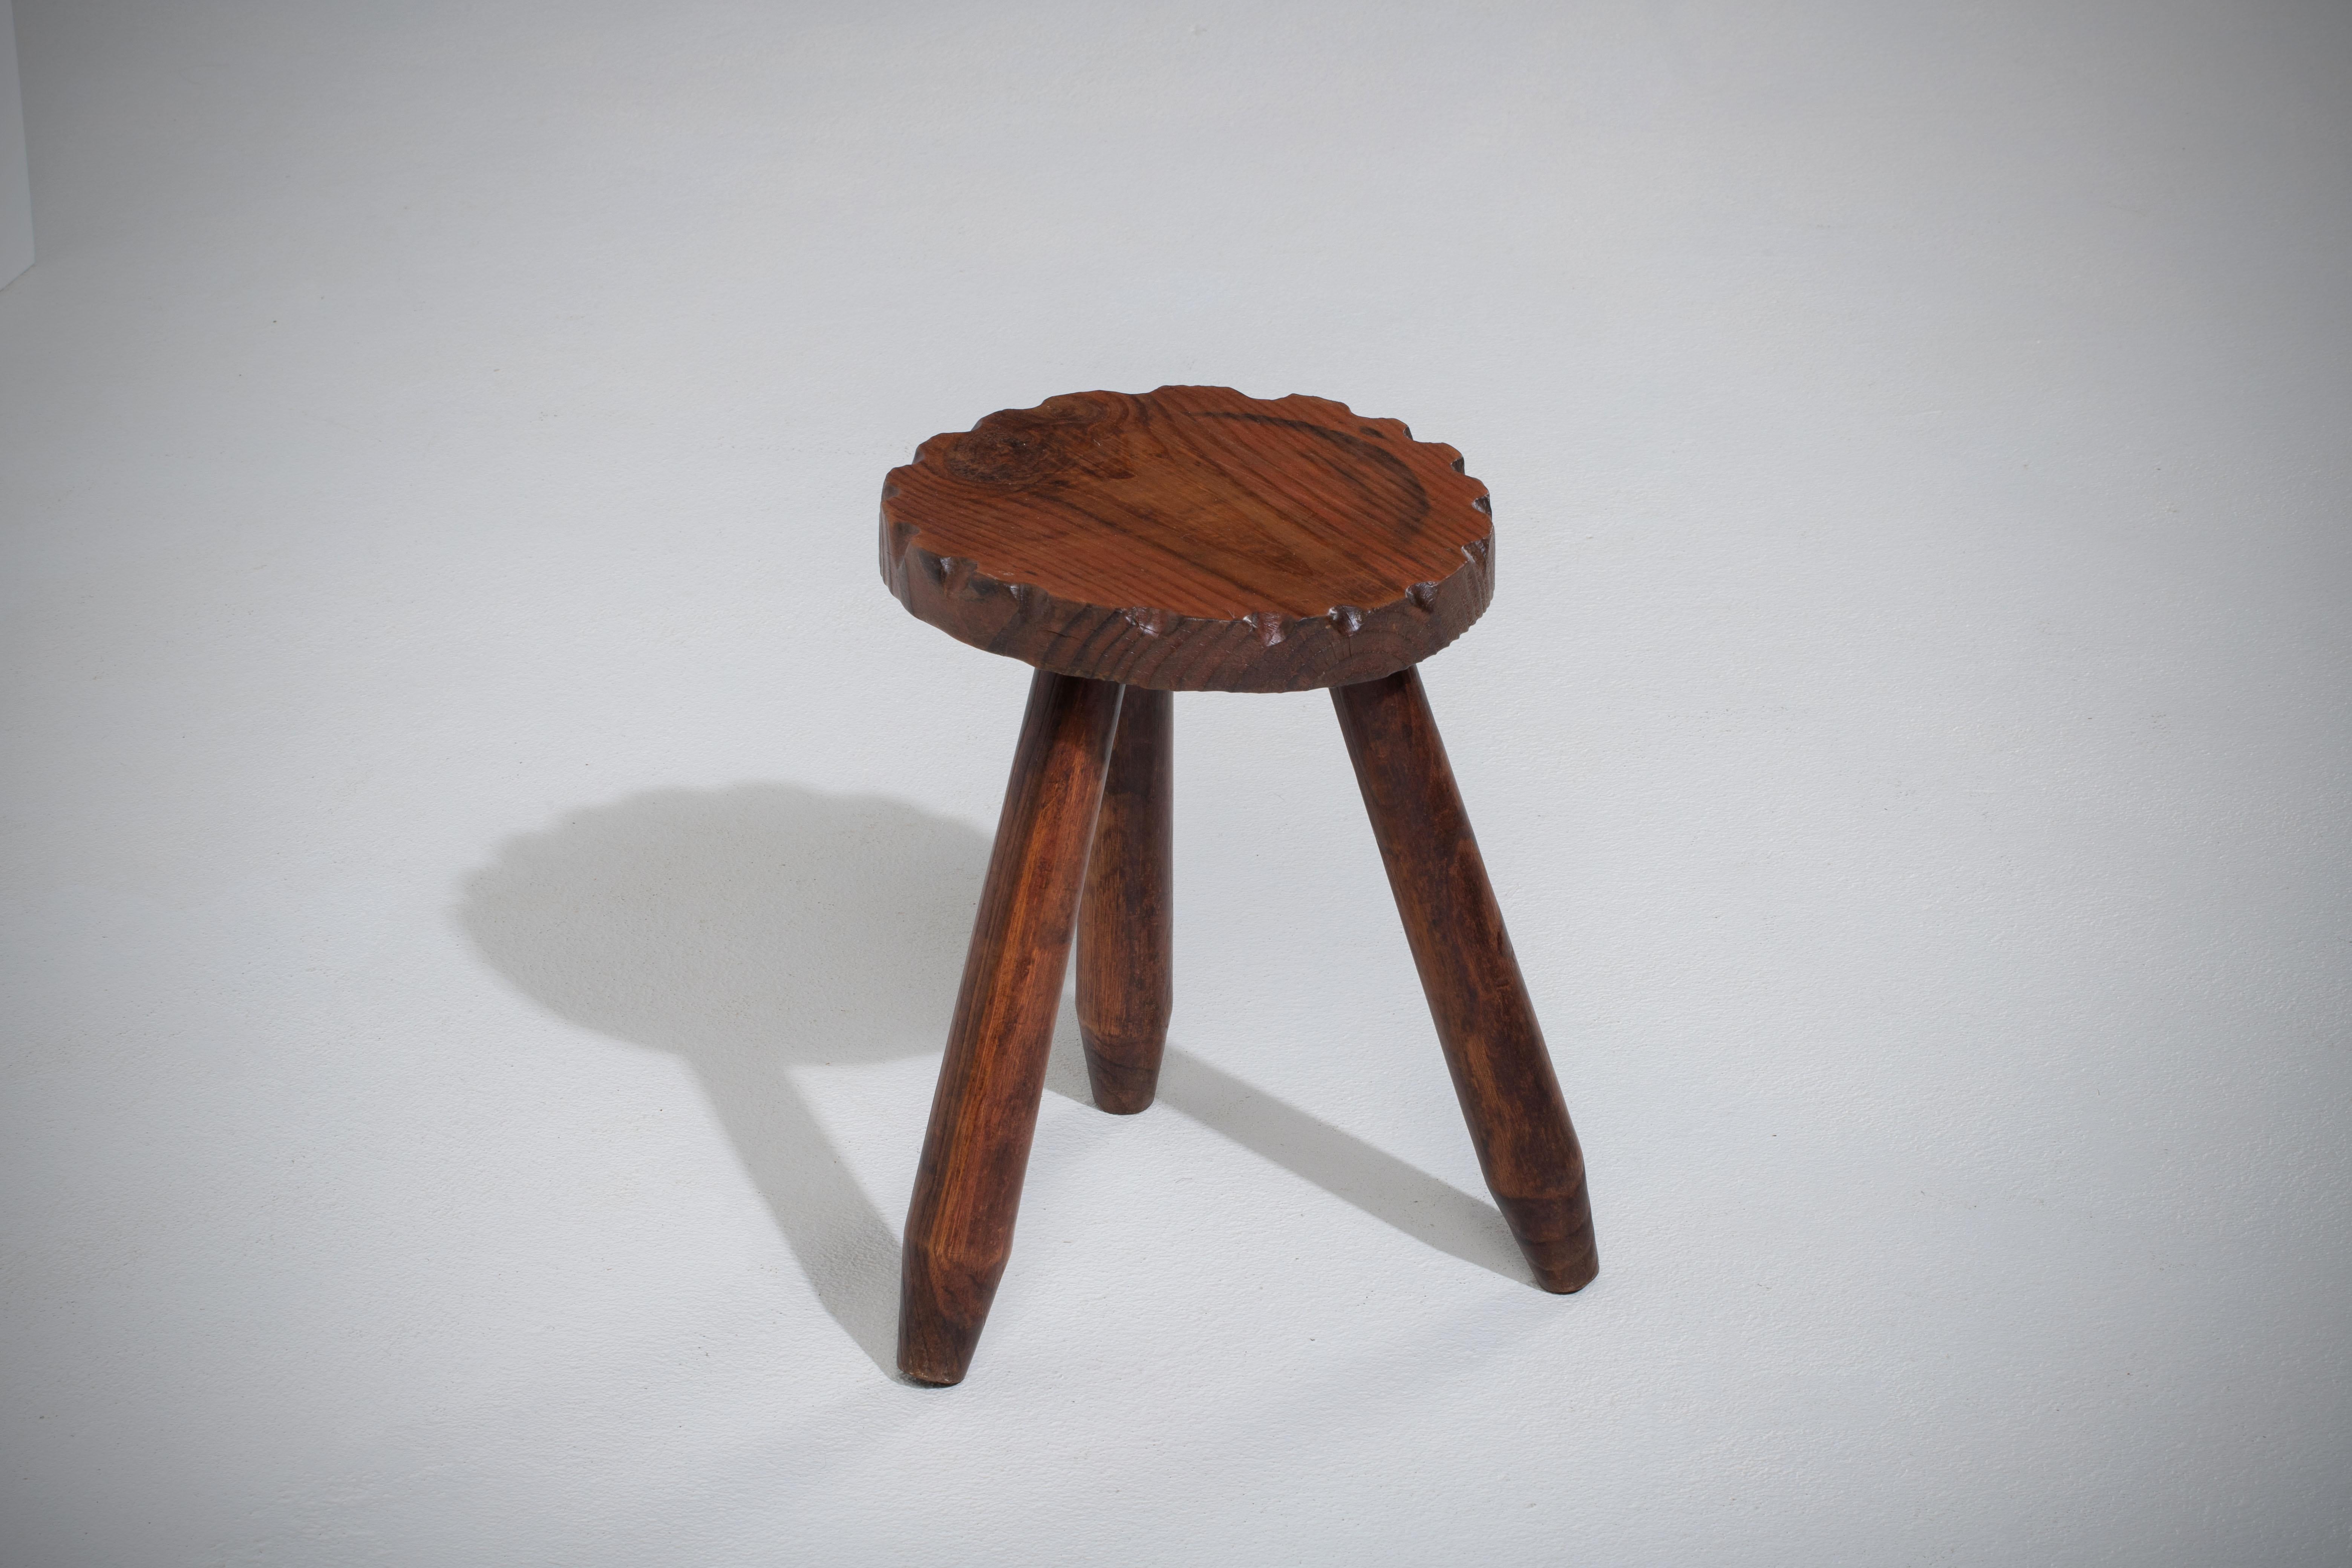 Introducing a fantastic mid-century wooden stool, crafted in France during the 1960s. This piece is constructed without the use of hardware, boasting an elegant octagonal seat, flared legs, and intricate gouge work, all made from rich walnut.

The